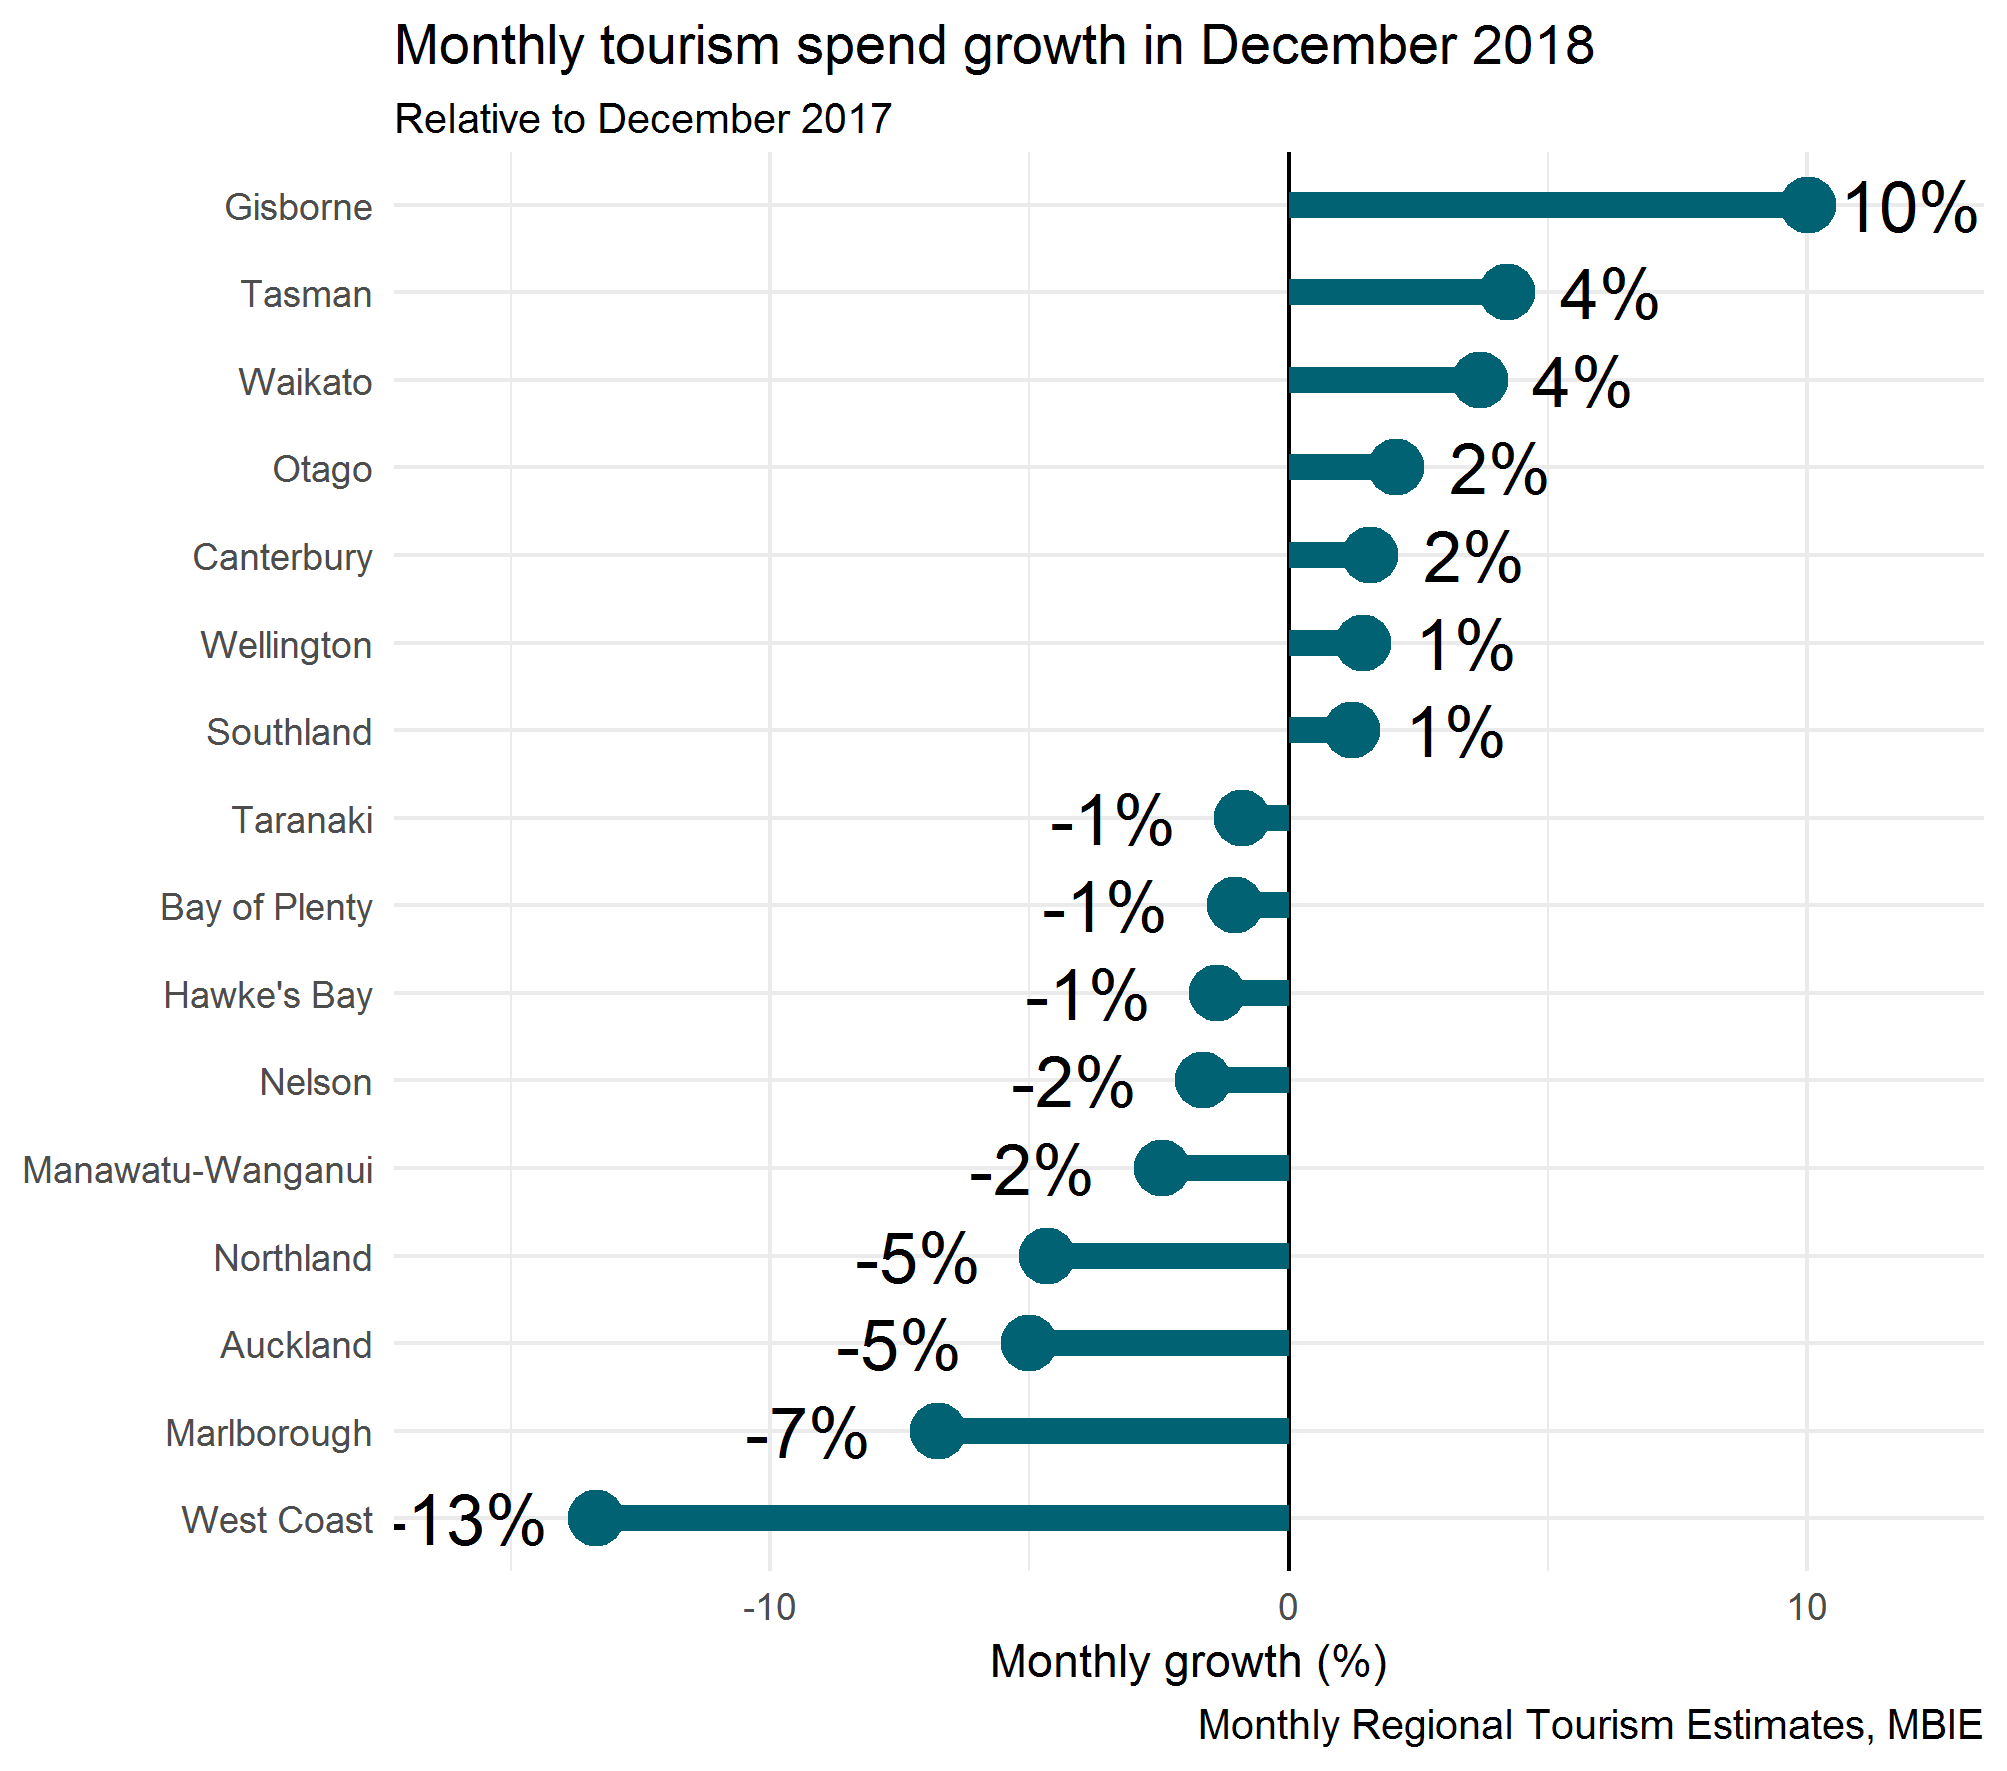 Monthly tourism spend growth by region